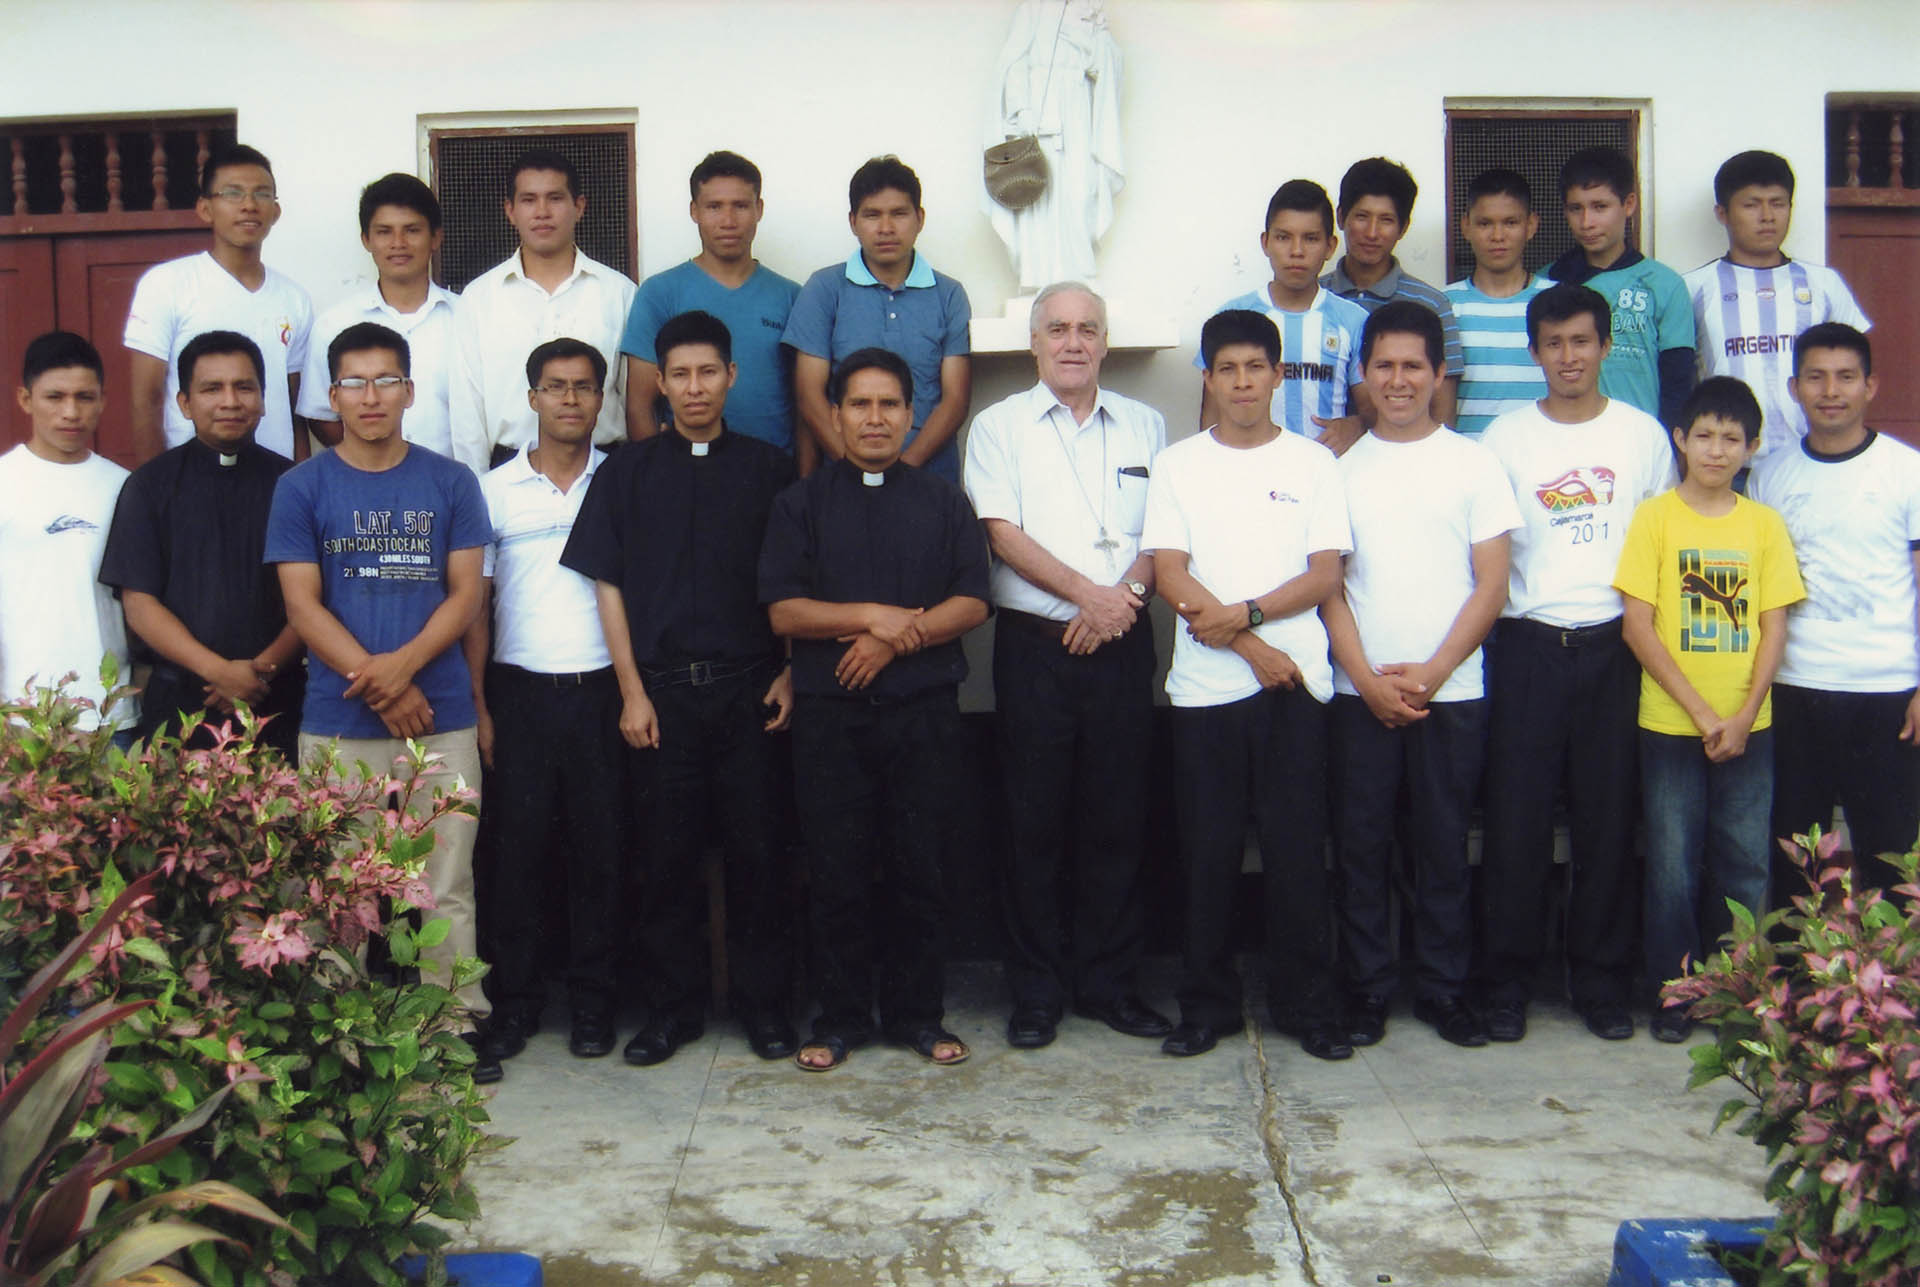 Formation of 26 seminarians of the Vicariate